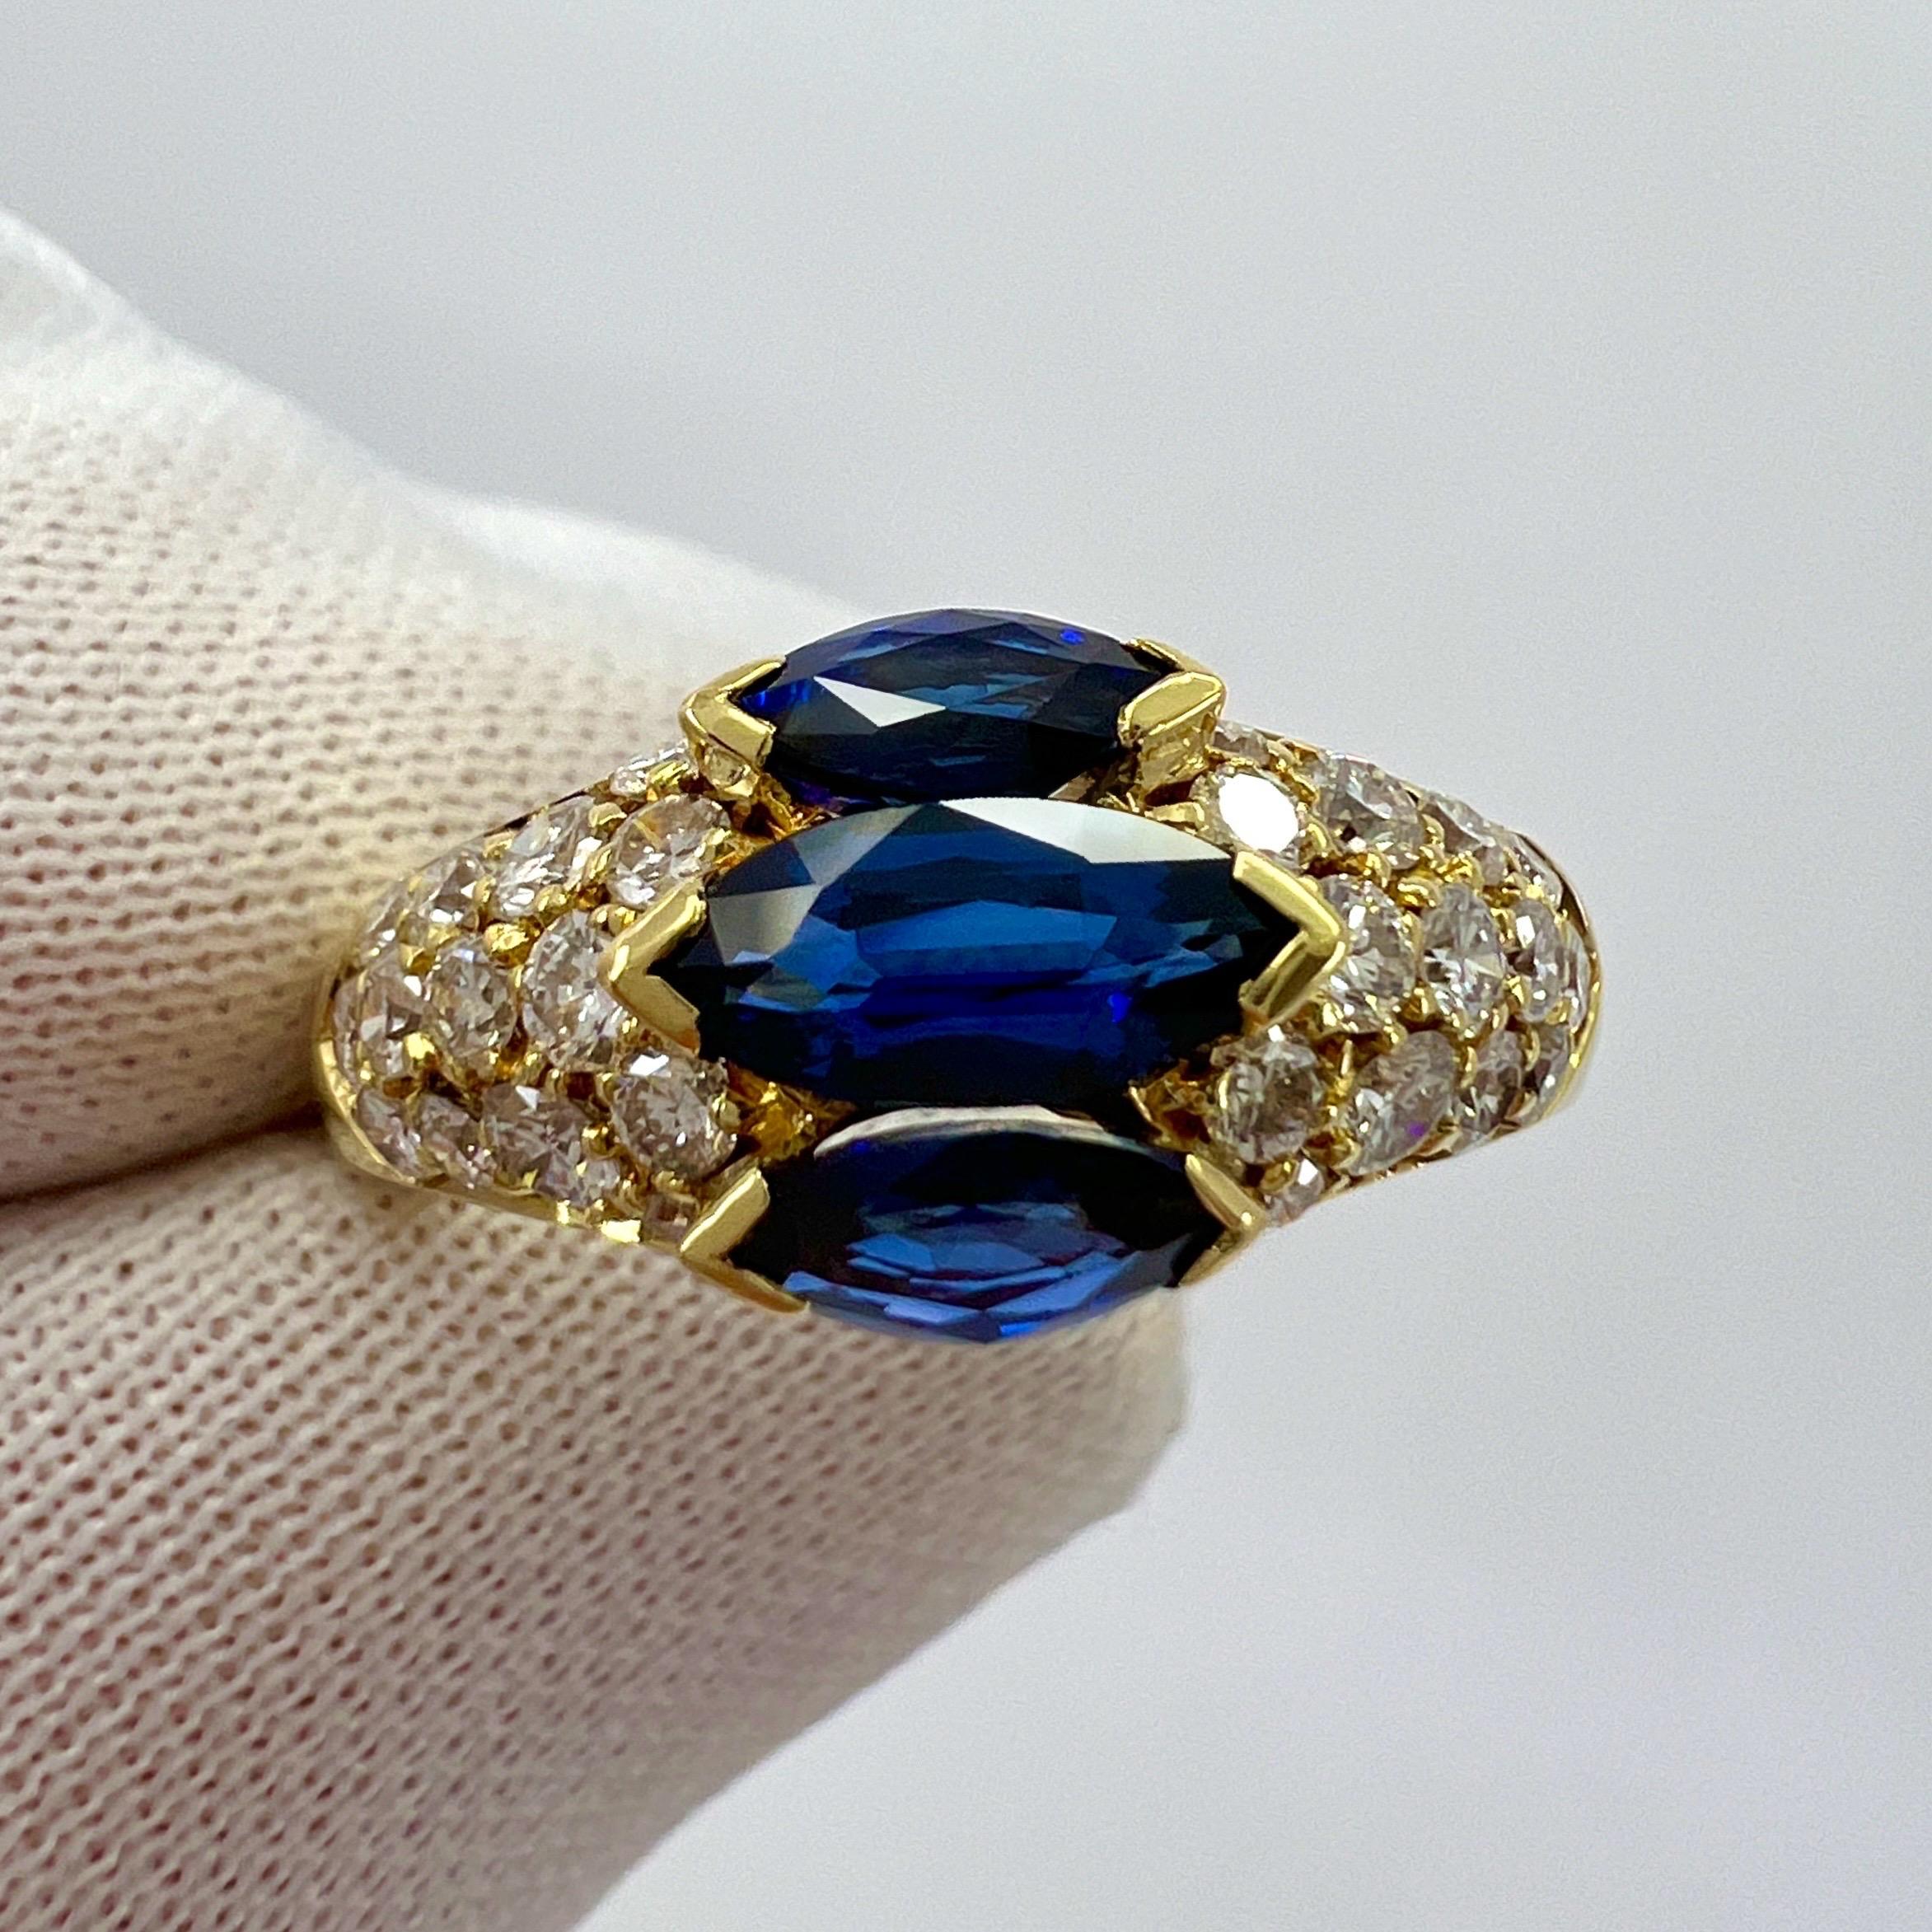 Women's or Men's Rare Vintage Van Cleef & Arpels Marquise Blue Sapphire And Diamond Cocktail Ring